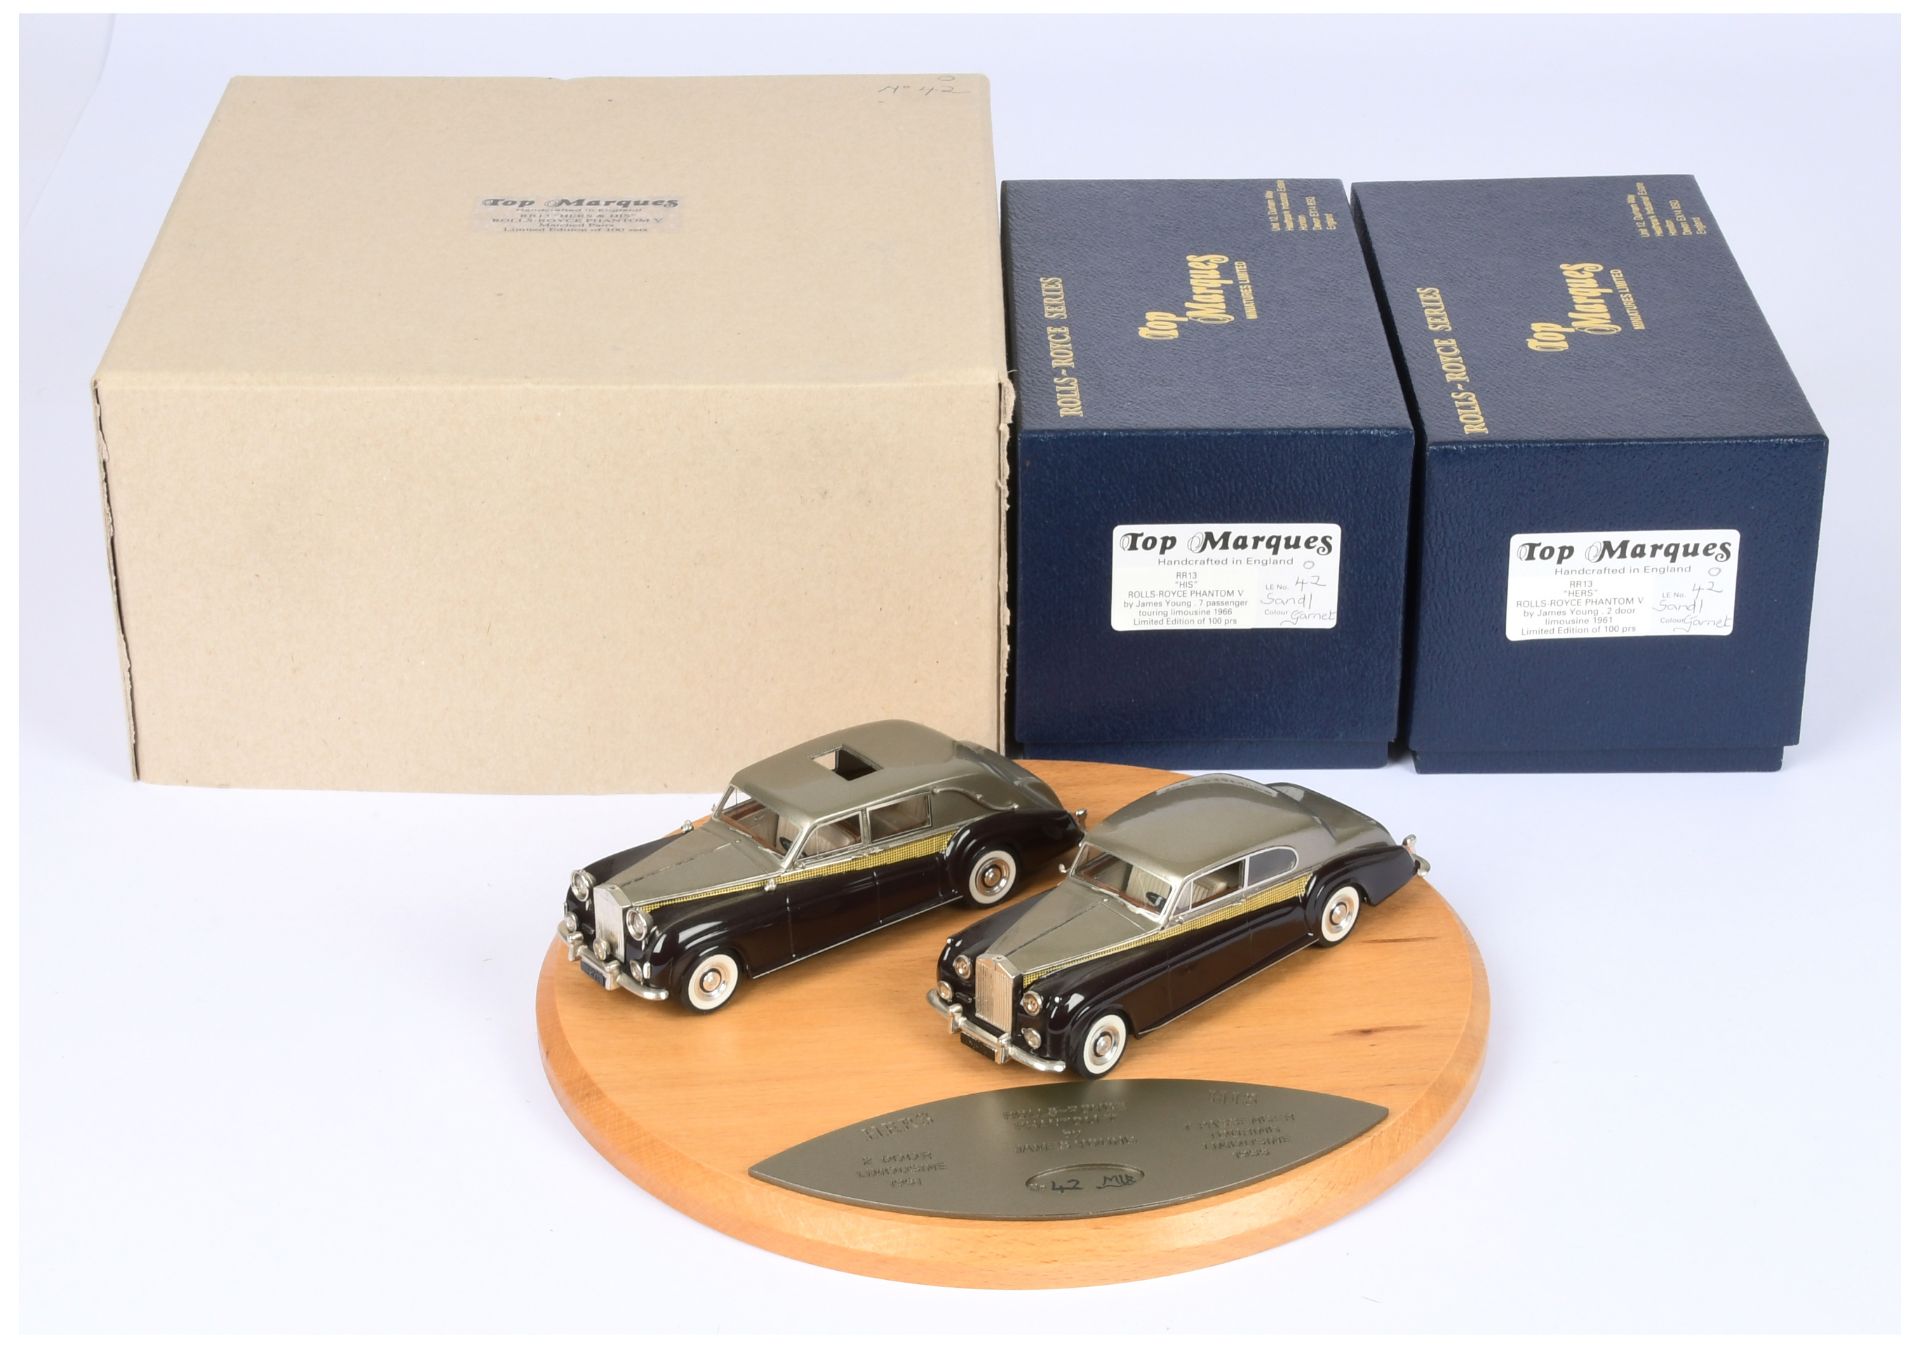 Top Marques RR13 1/43rd scale "His & Hers" Rolls Royce Set Phantom V by James Young comprising 19...